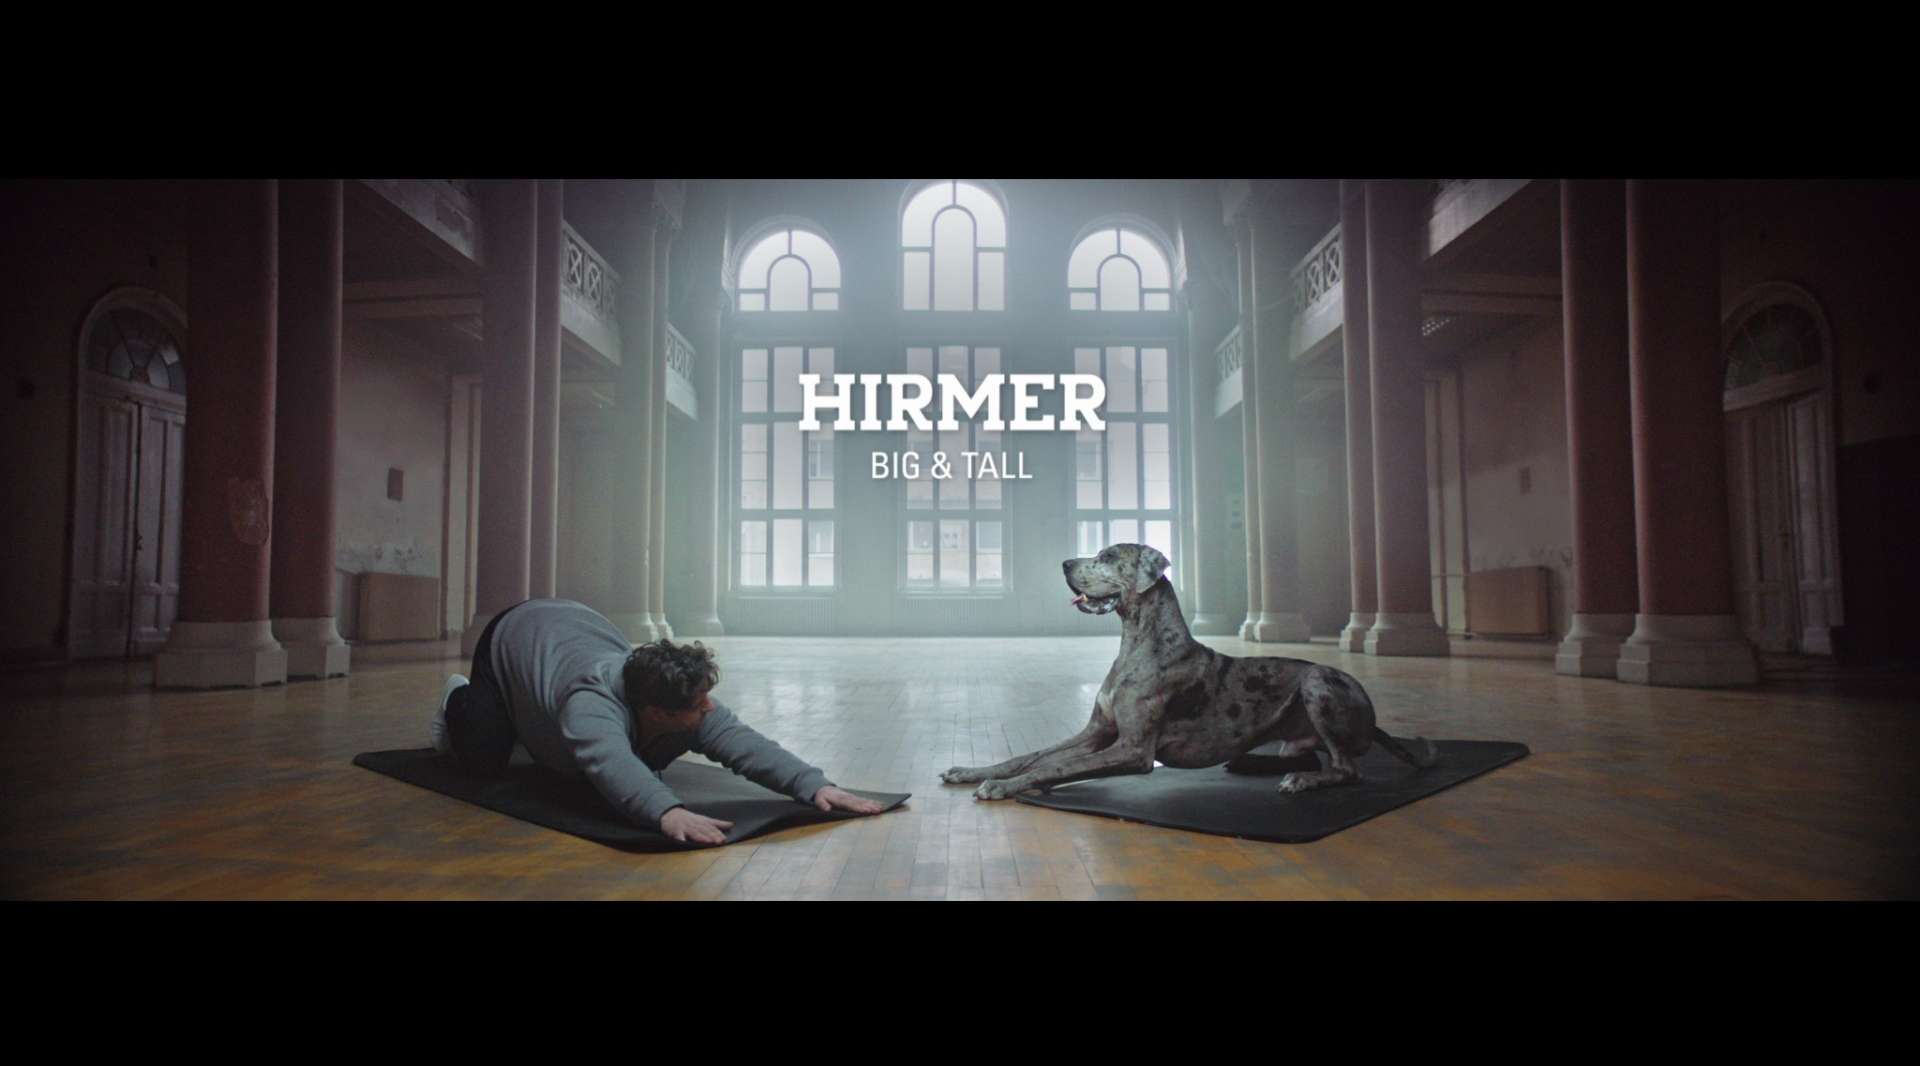 Hirmer - Real men come in all sizes